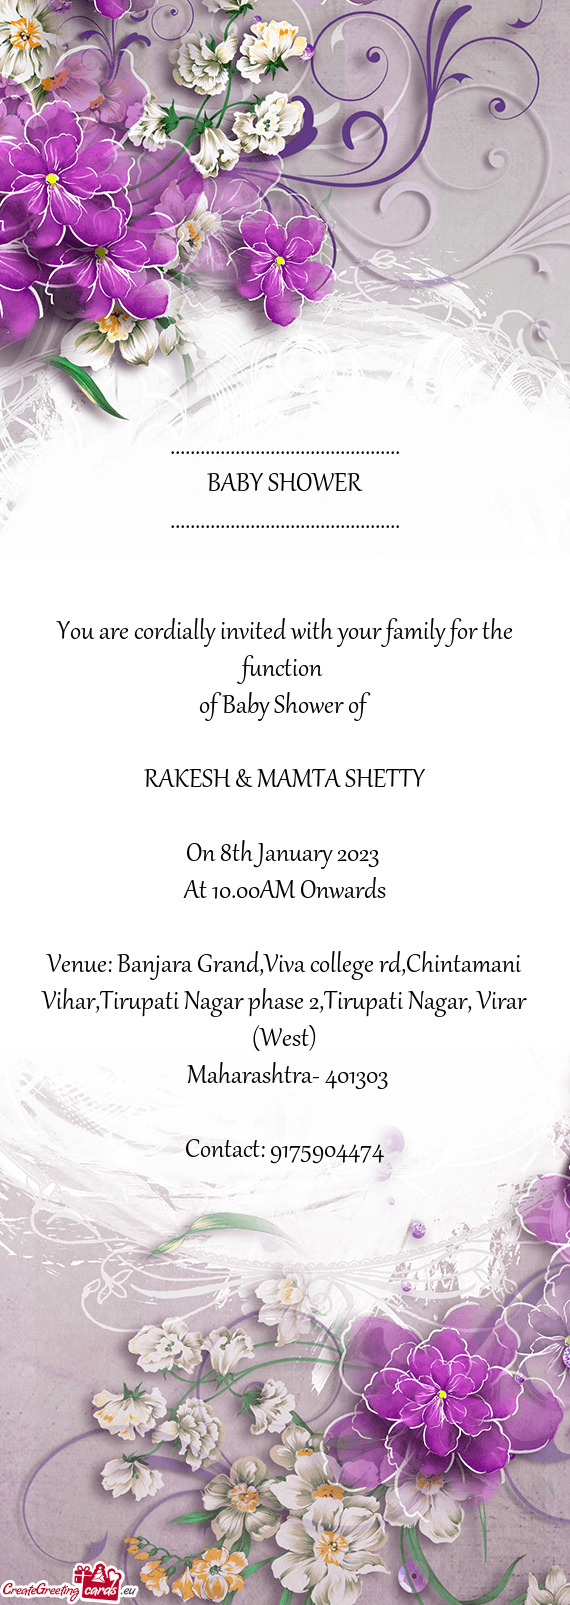 You are cordially invited with your family for the function